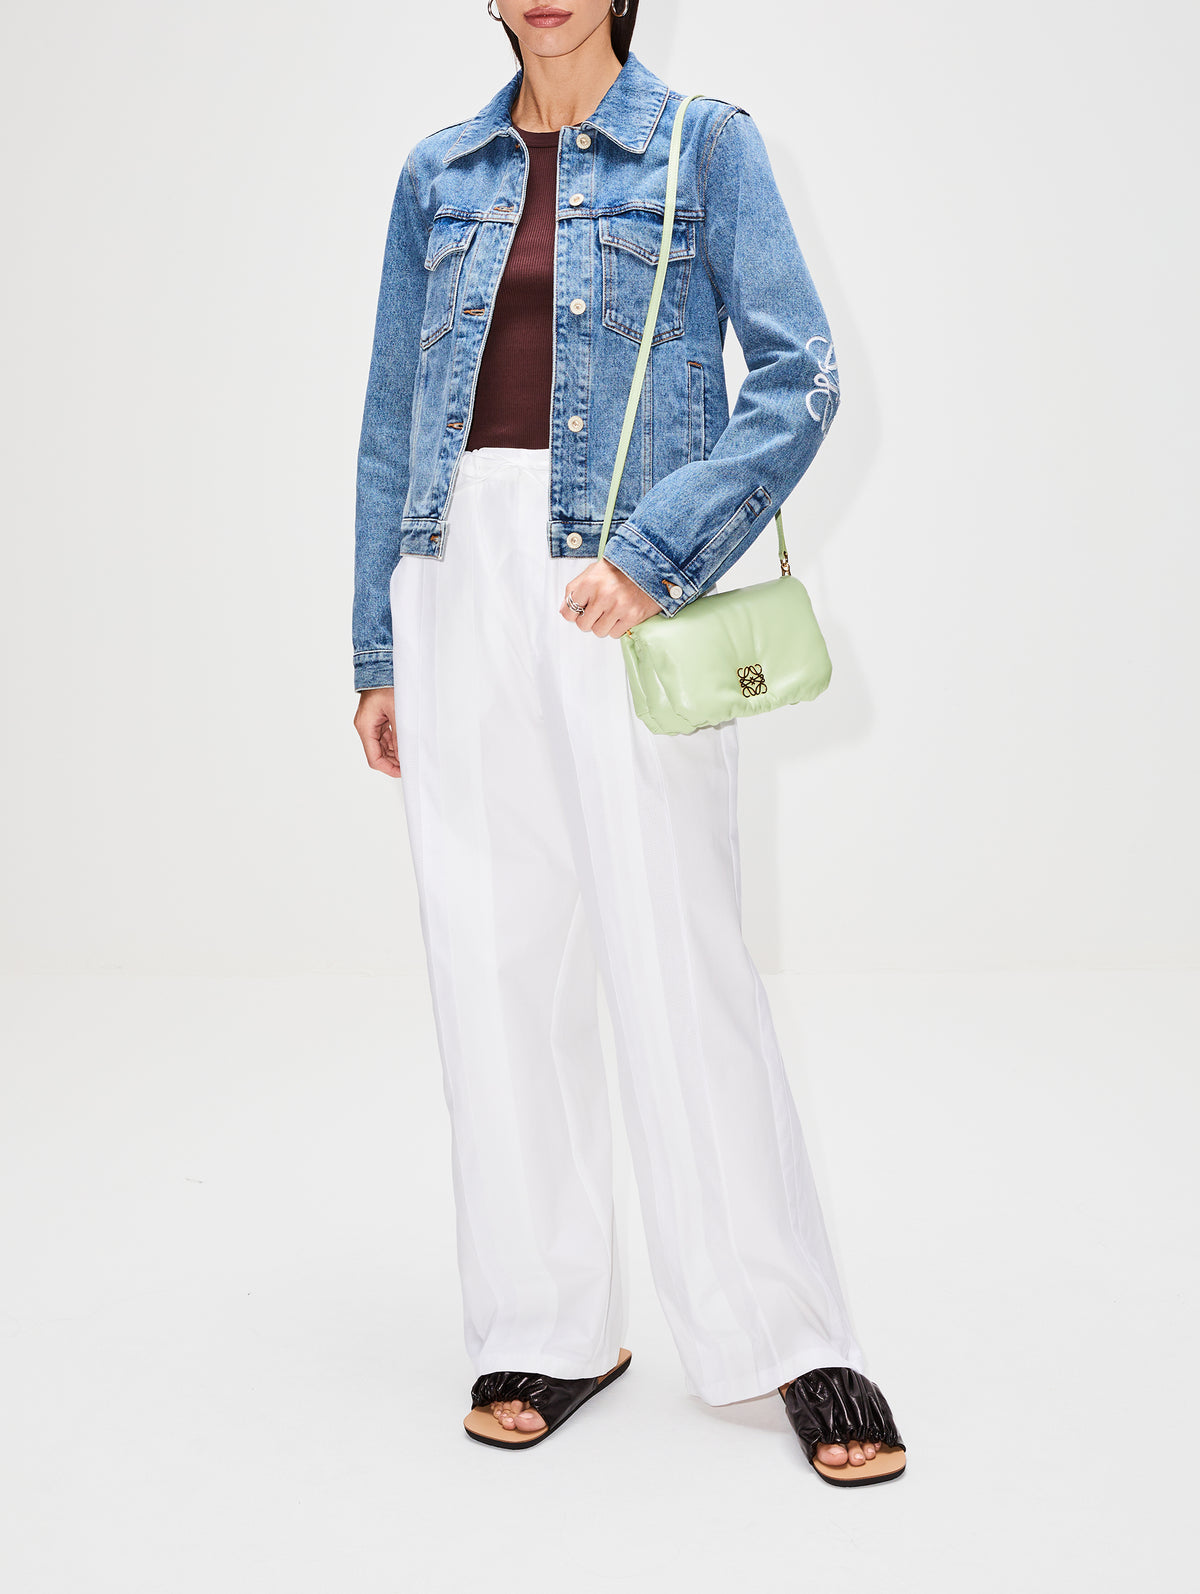 Loewe Goya Puffer Bag outfit inspo for your summer #fobe